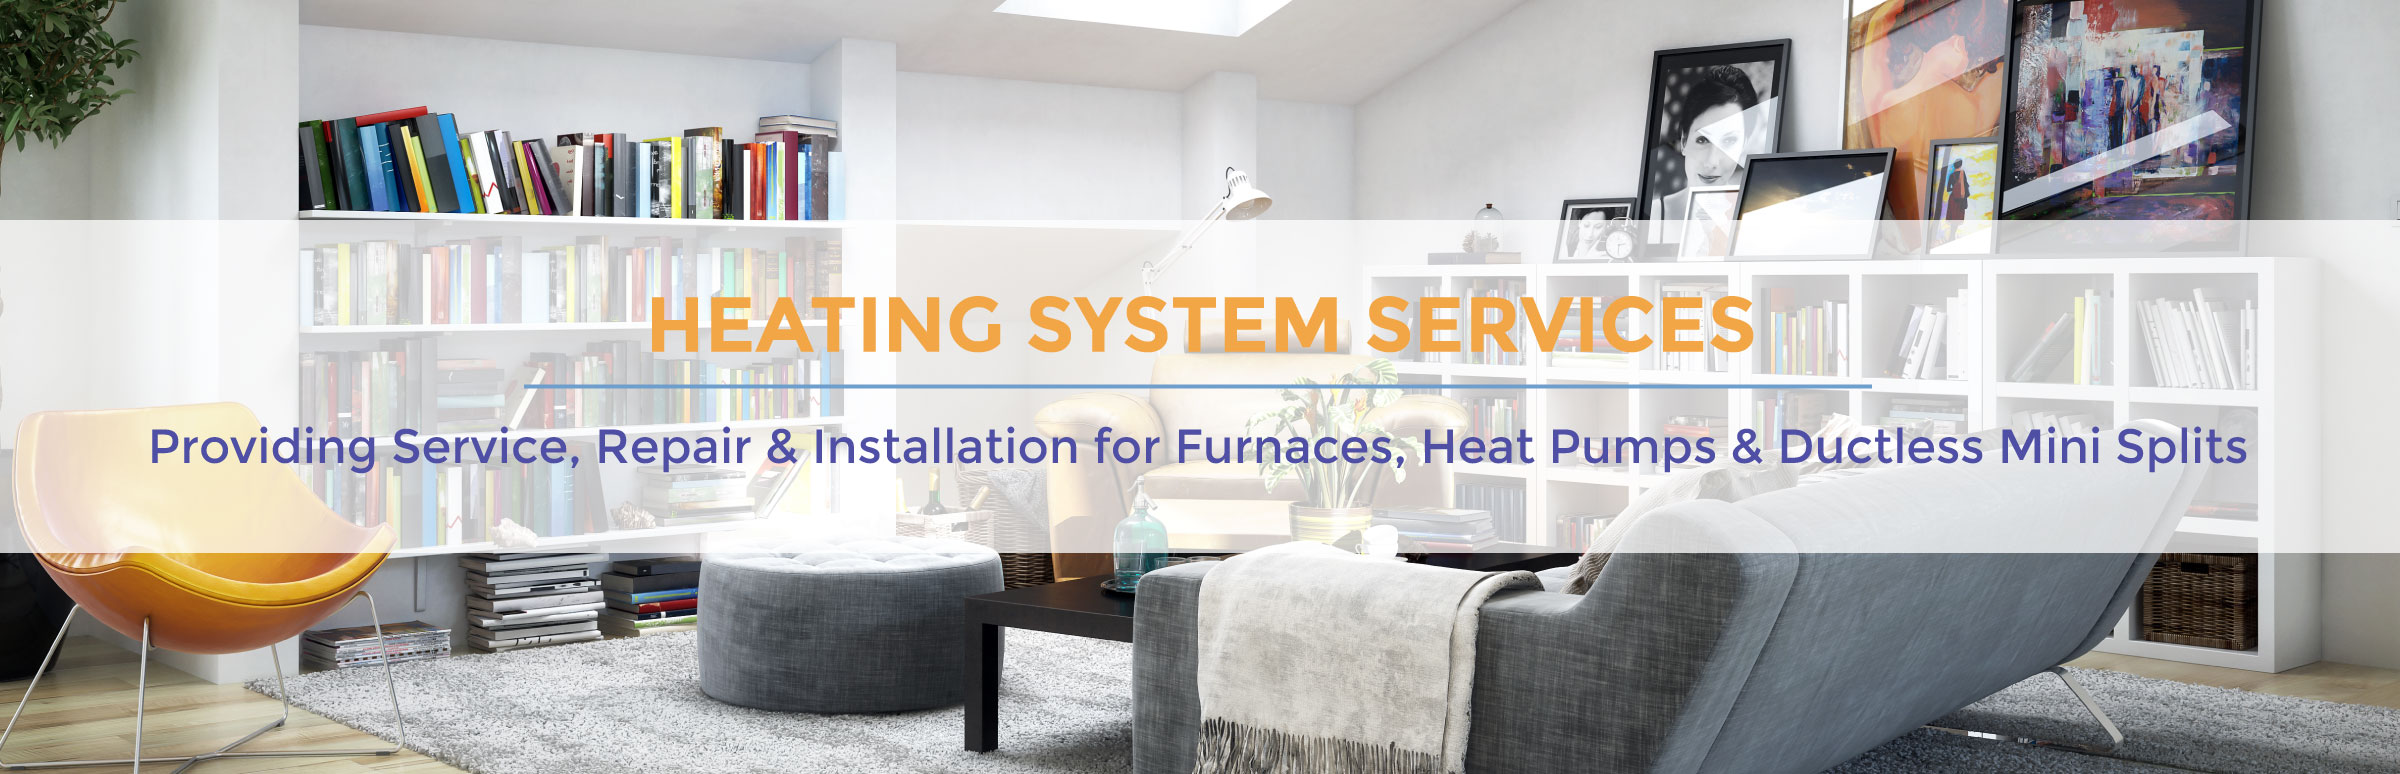 We provide service and repair for furnaces, ductless split systems and heat pumps!